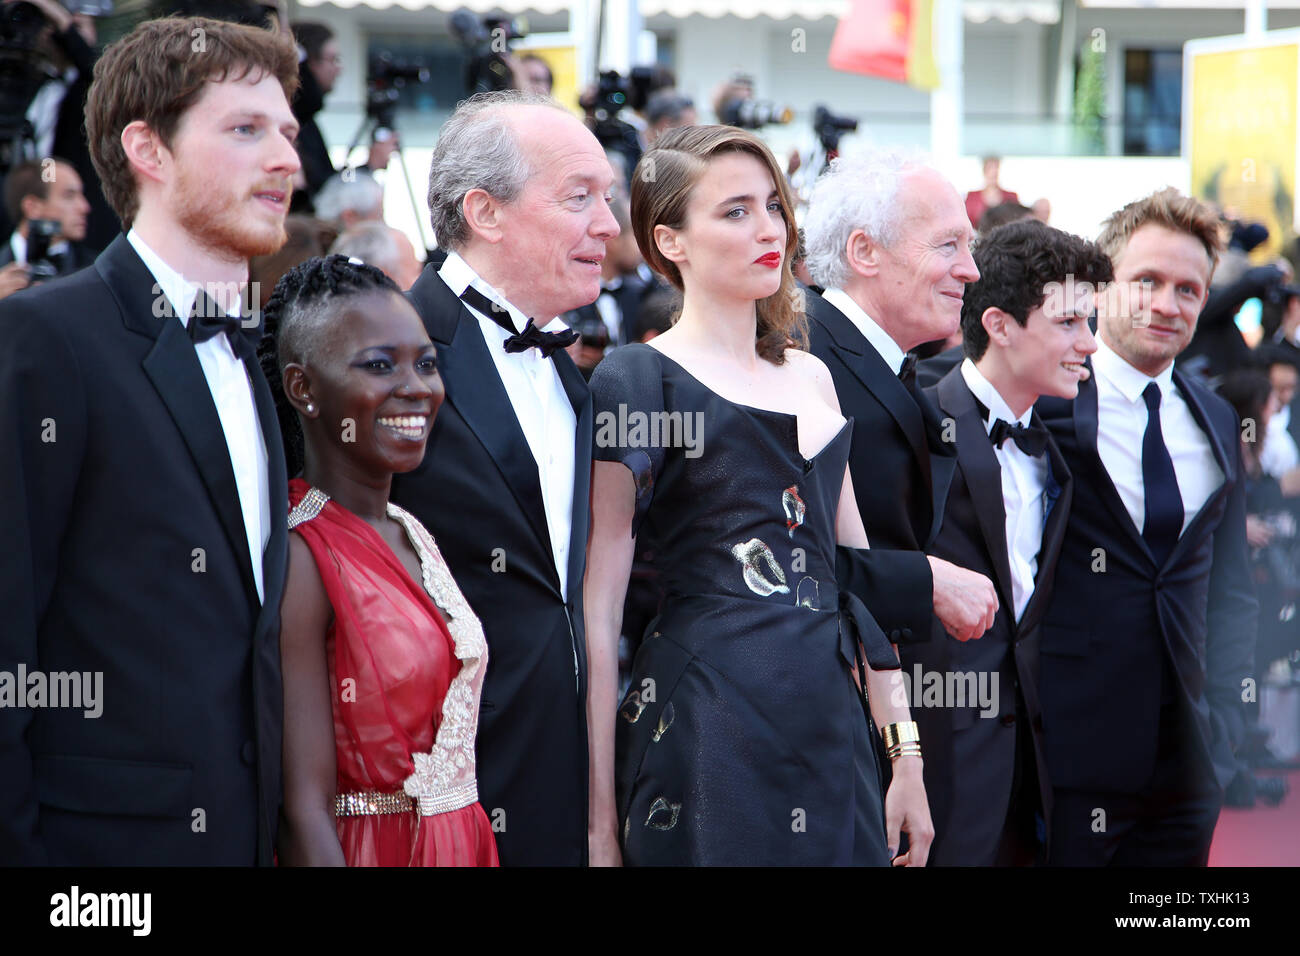 From L to R) Olivier Bonnaud, Nadege Ouedraogo, Luc Dardenne, Adele Haenel,  Jean-Pierre Dardenne, Louka Minnella and Jeremie Renier arrive on the red  carpet before the screening of the film "La Fille